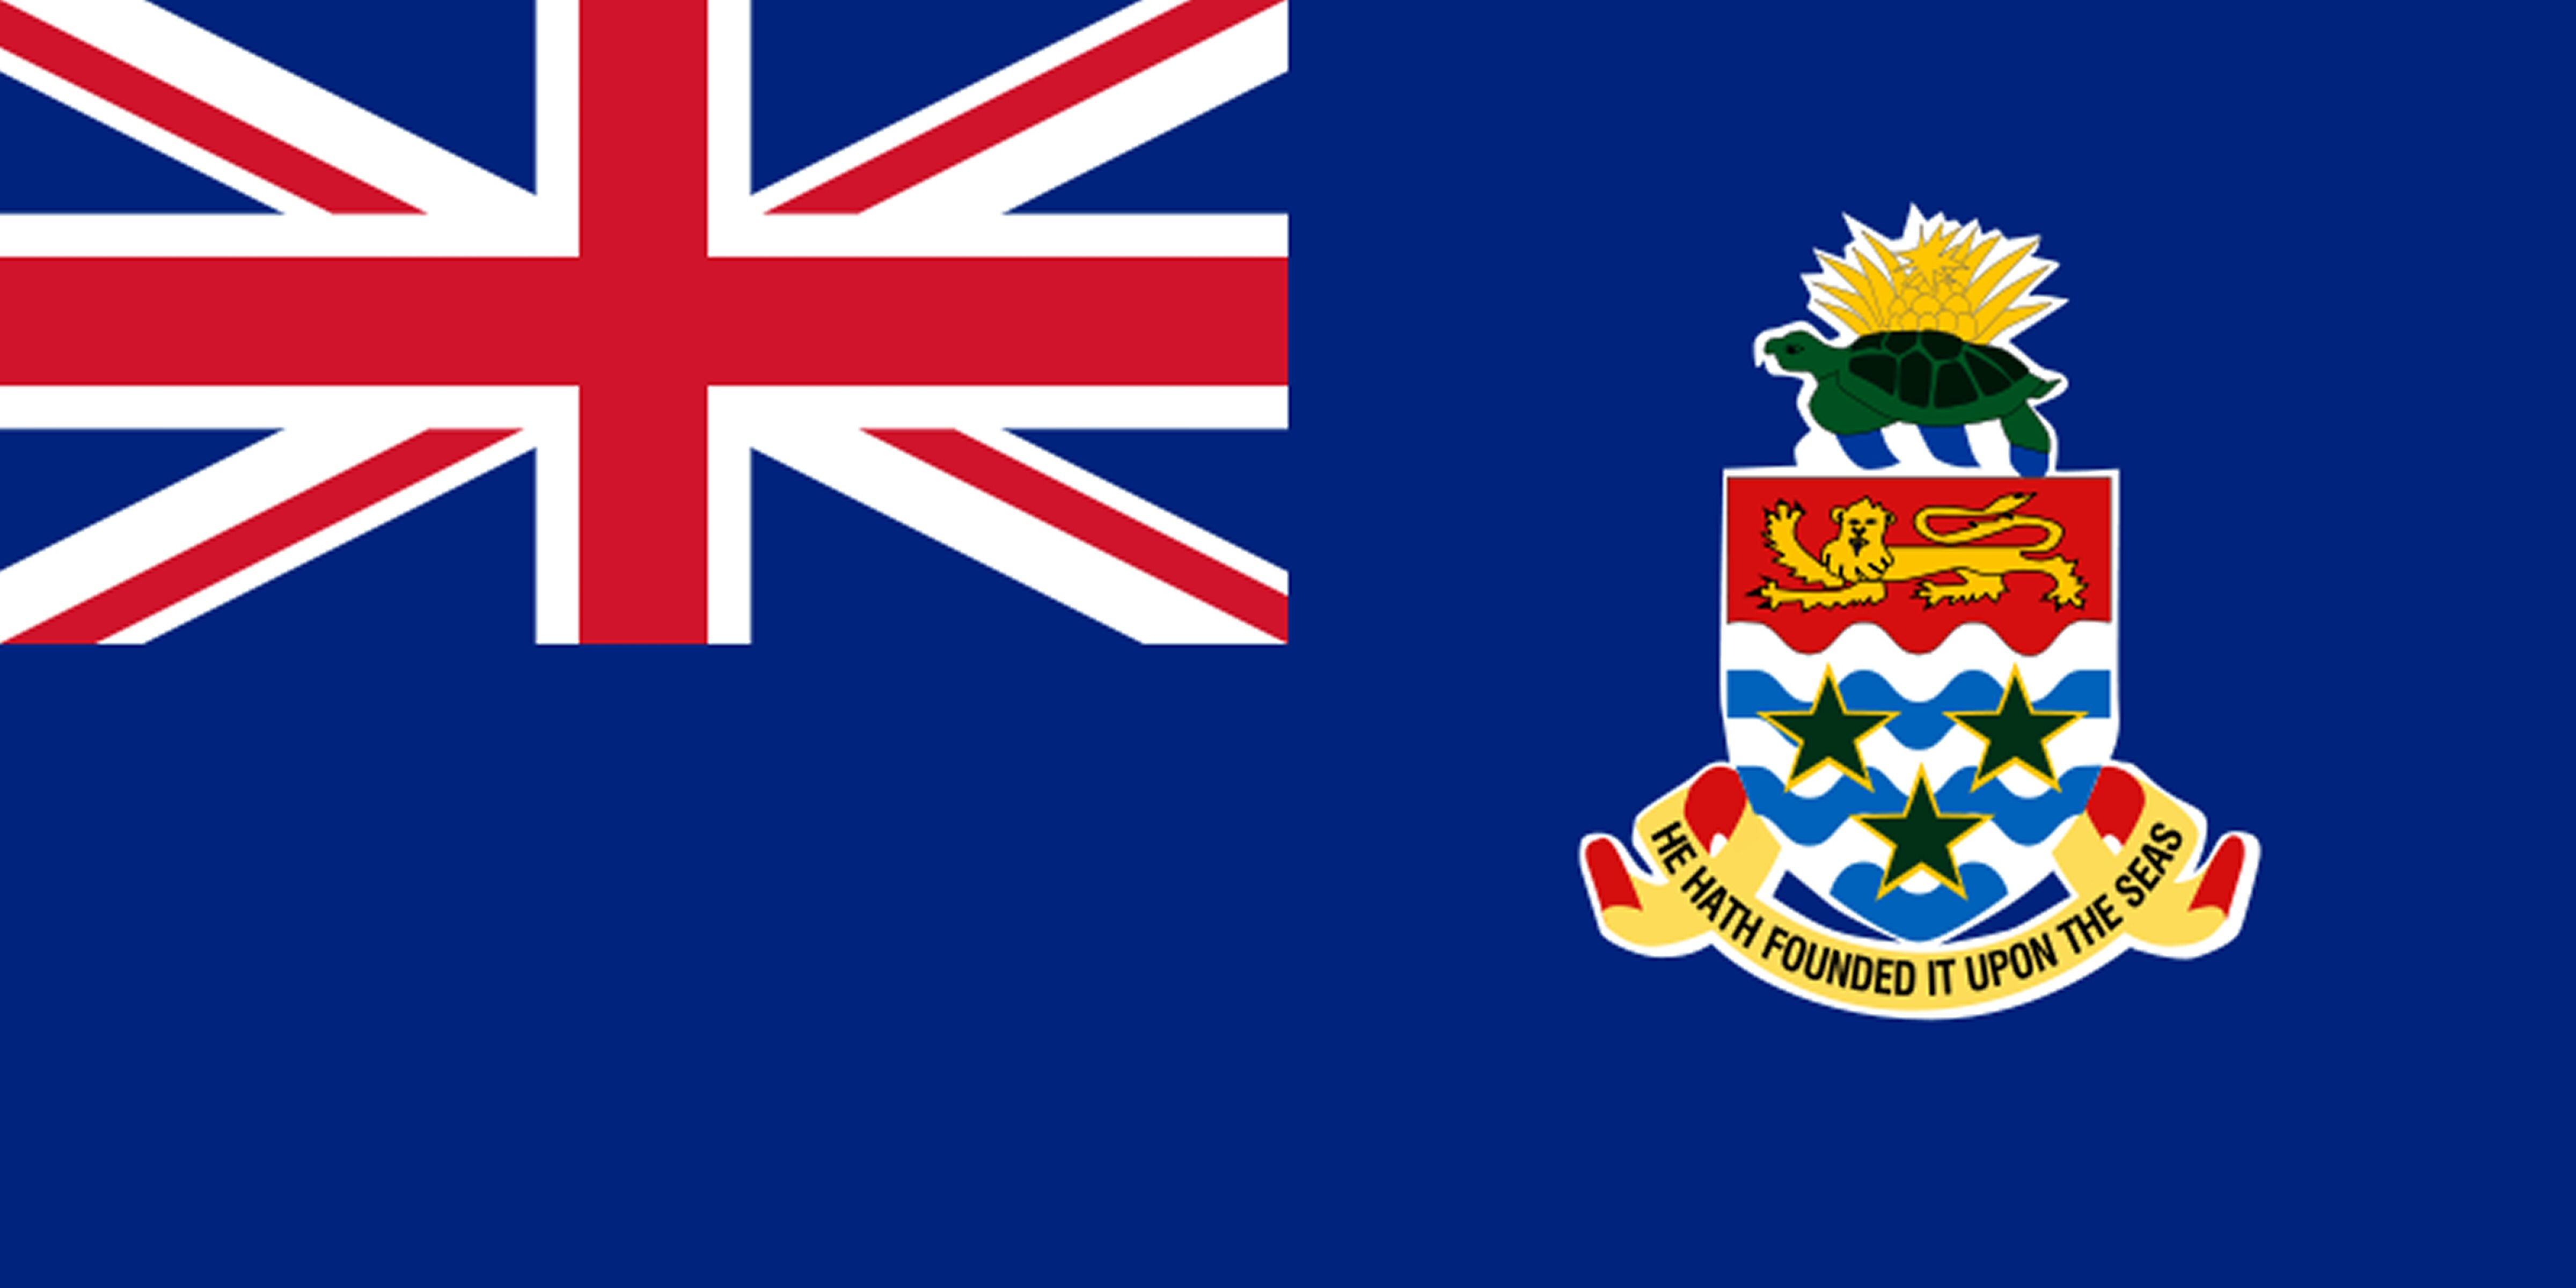 Free download cayman islands flag cayman islands flag cayman islands flag cayman [4800x2400] for your Desktop, Mobile & Tablet. Explore Cayman Island Wallpaper for Computer. Tropical Island Desktop Wallpaper